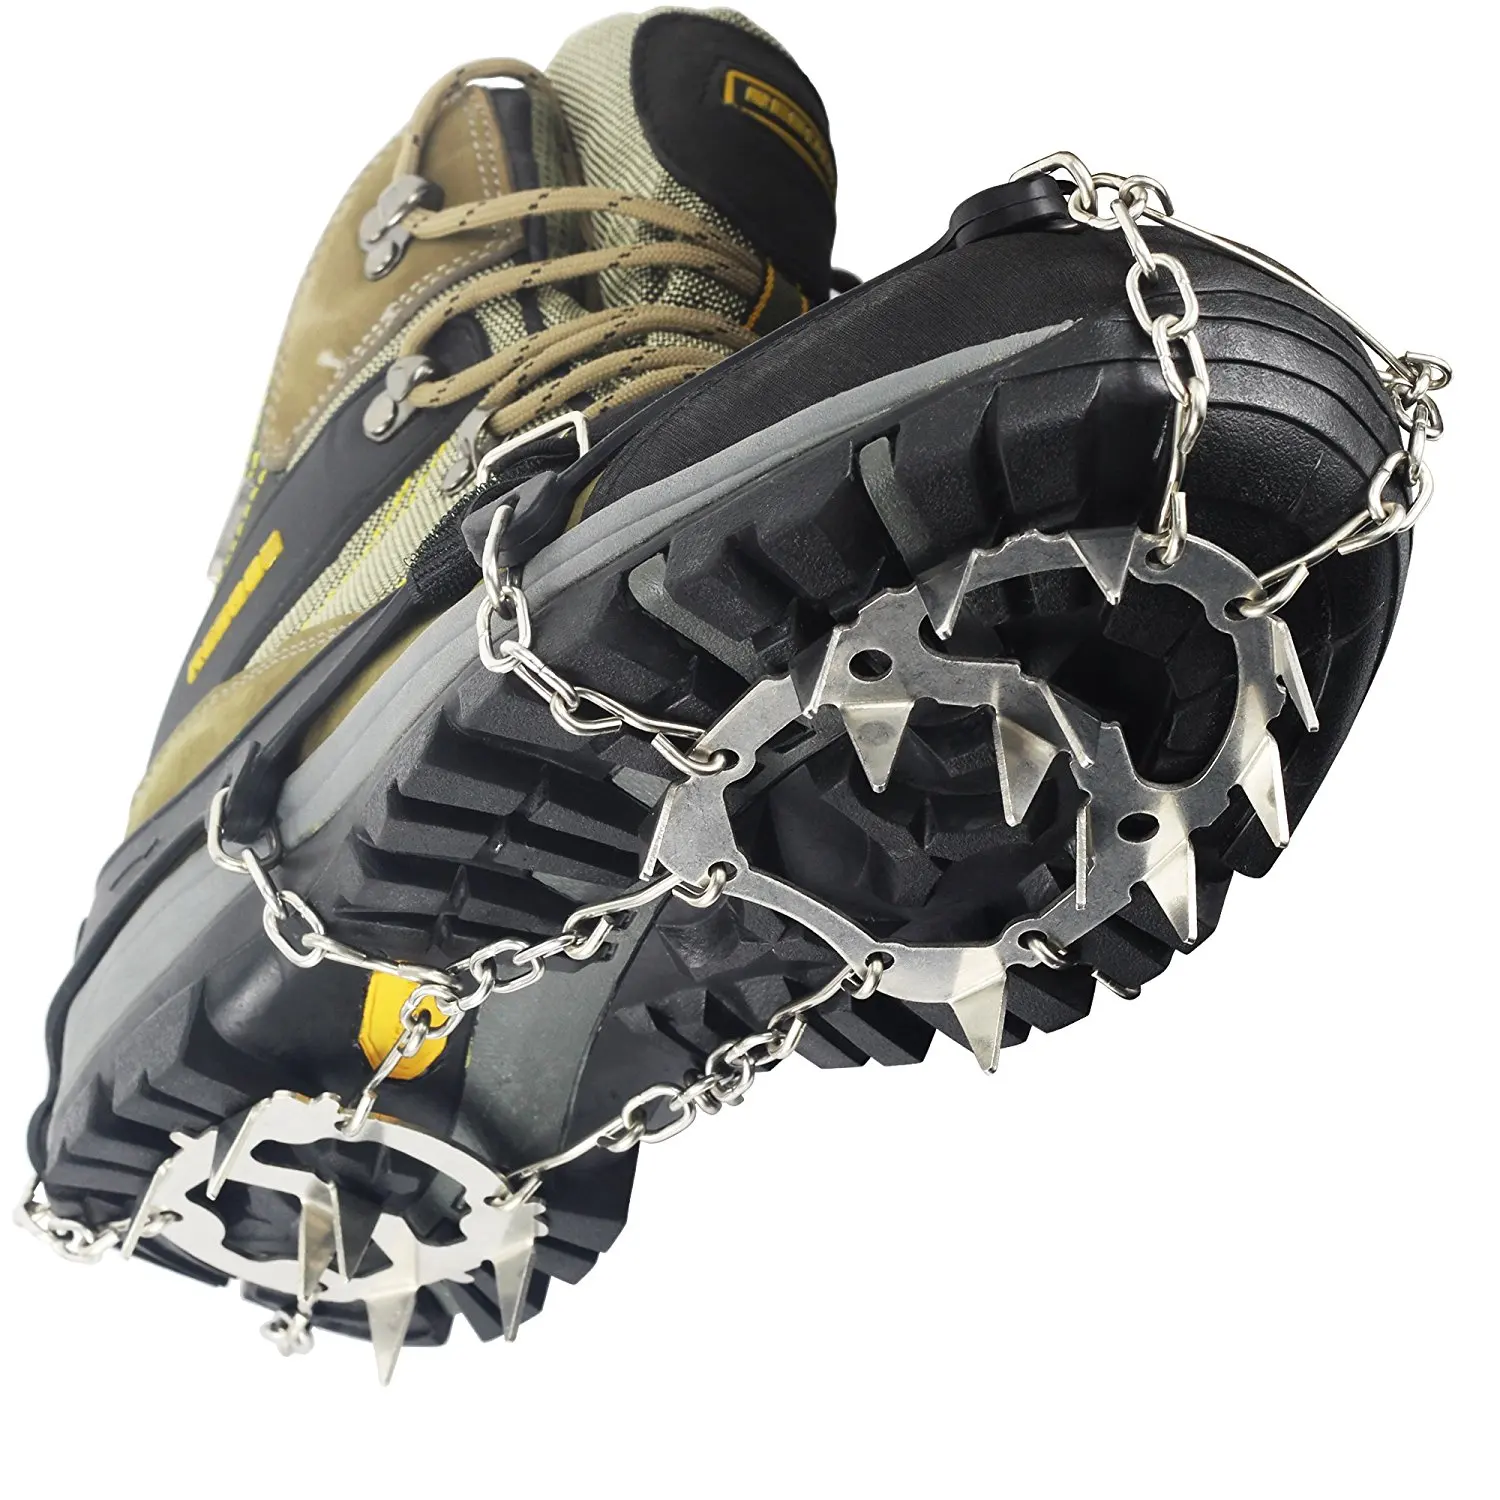 ICE SNOW ANTI SLIP SPIKES-GRIPS GRIPPERS CRAMPON CLEATS FOR SHOES BOOT OVERSHOE 